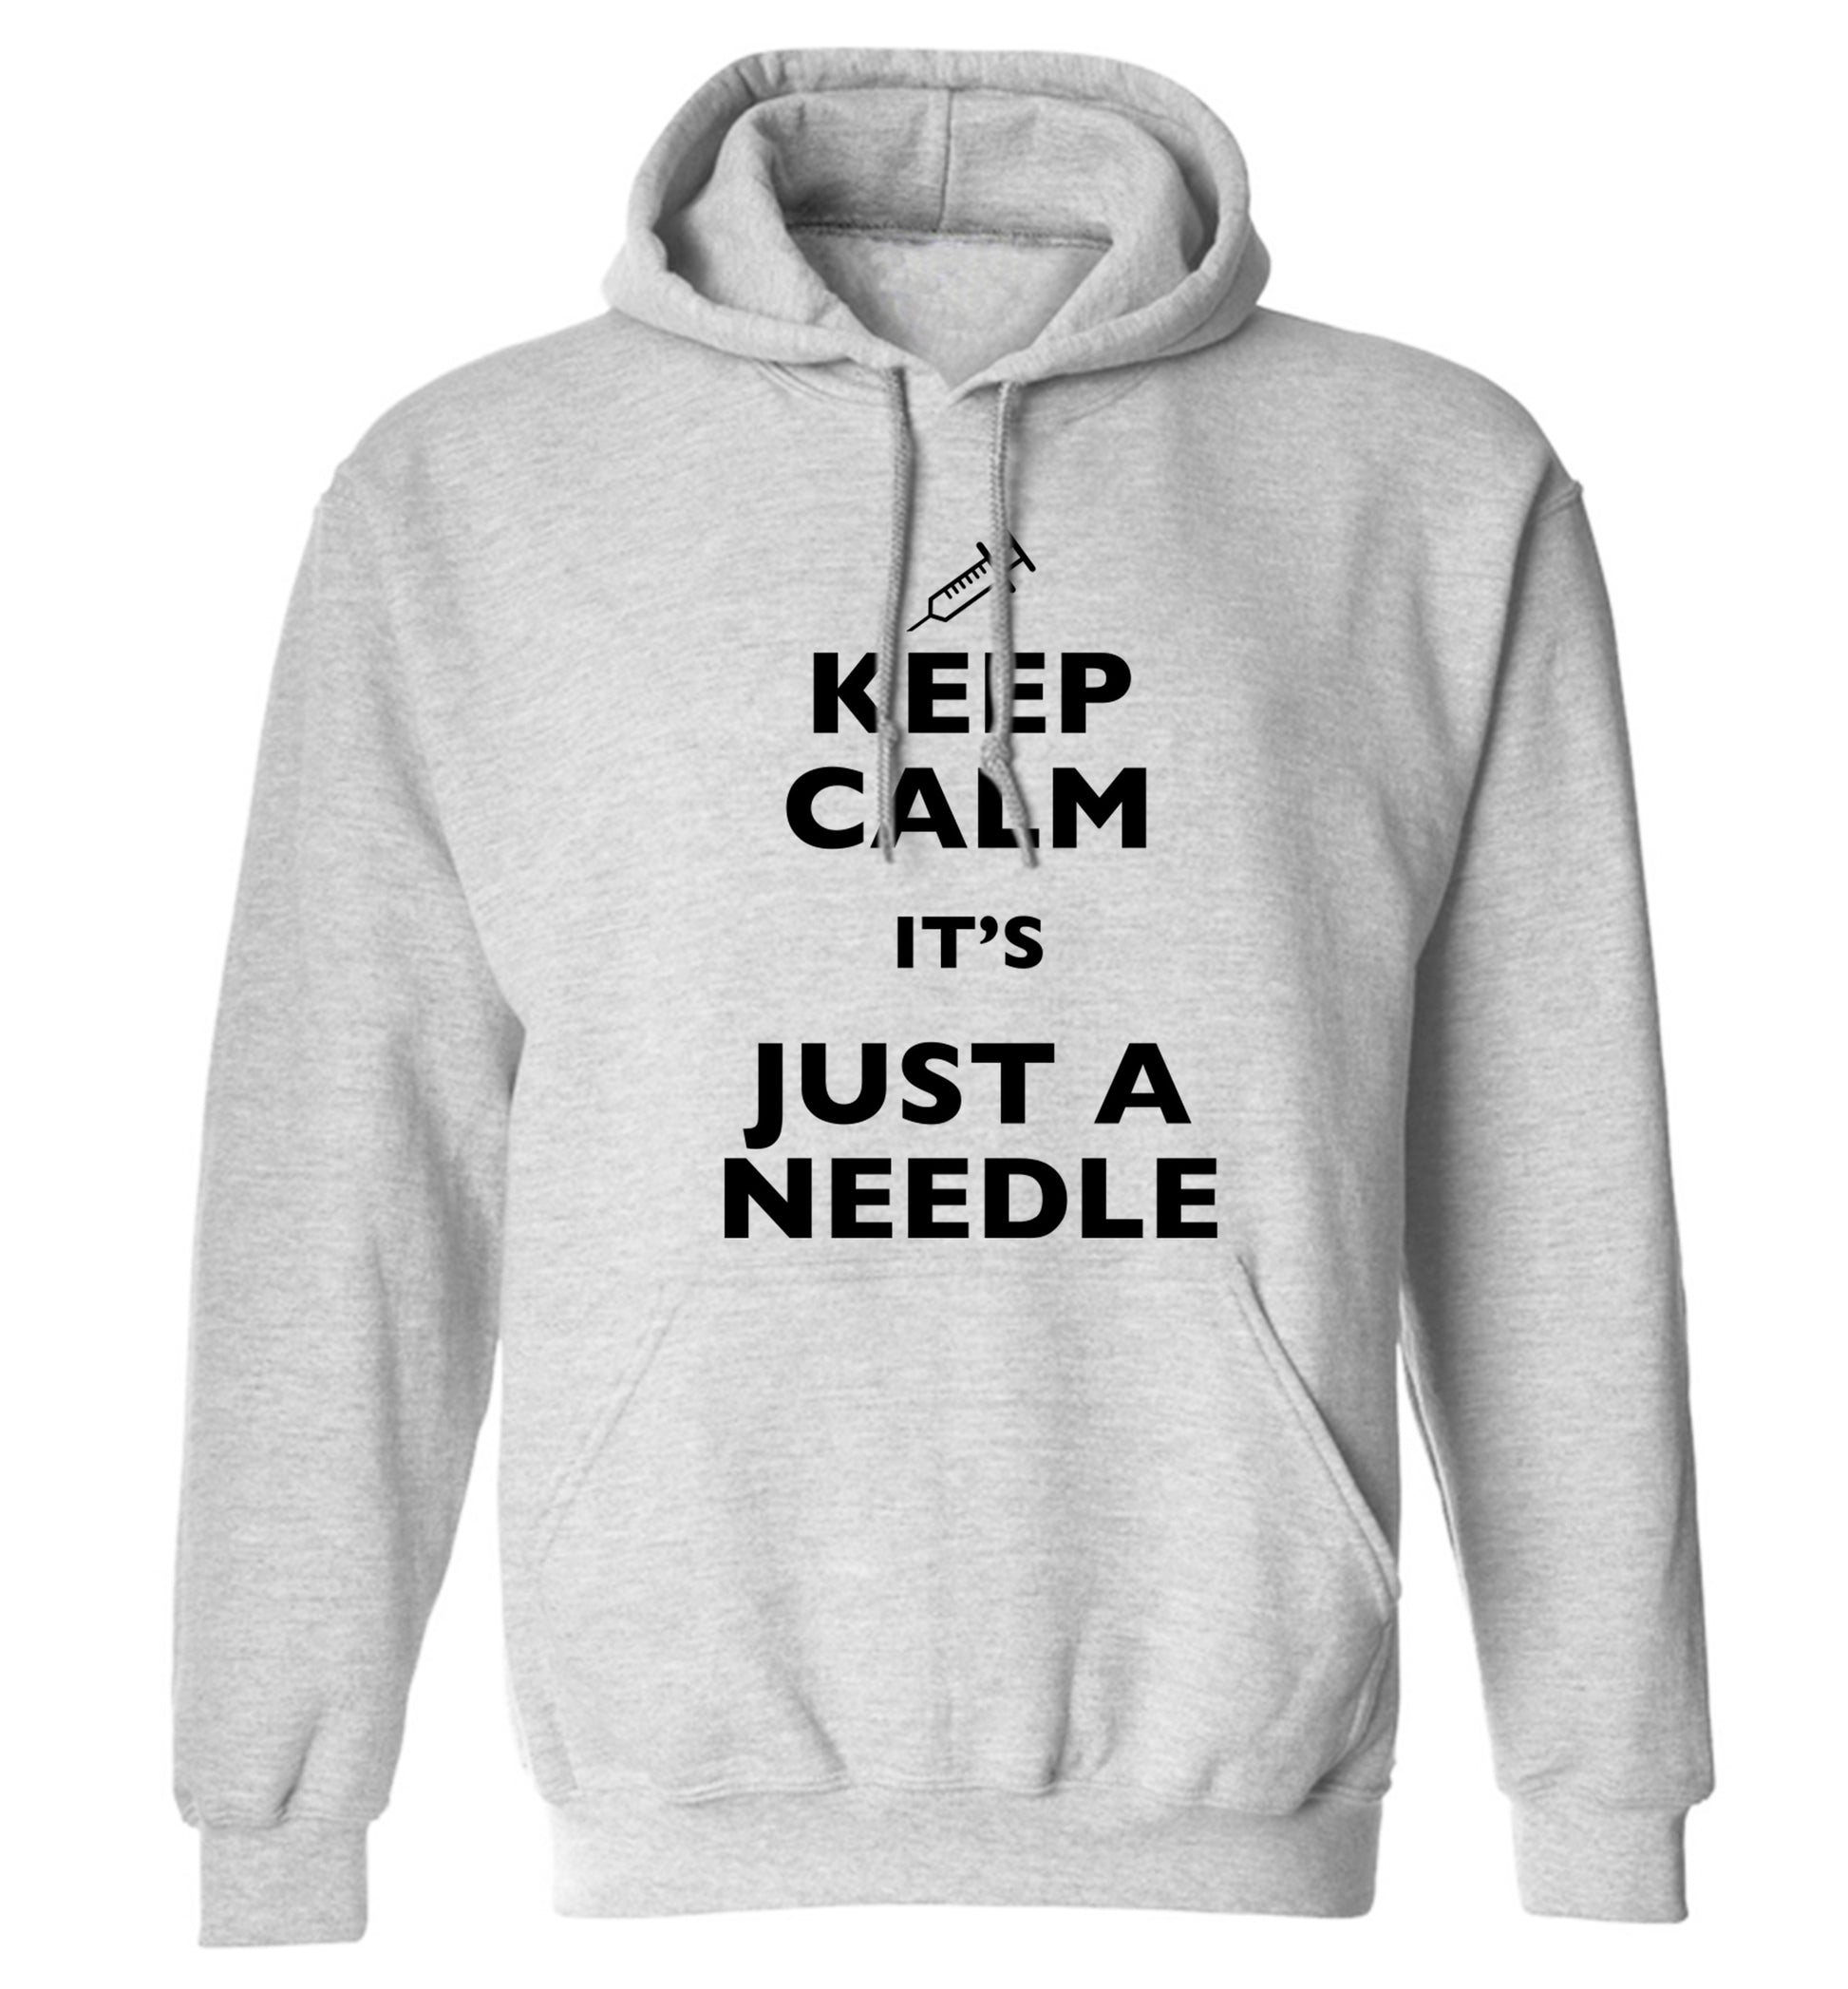 Keep calm it's only a needle adults unisex grey hoodie 2XL